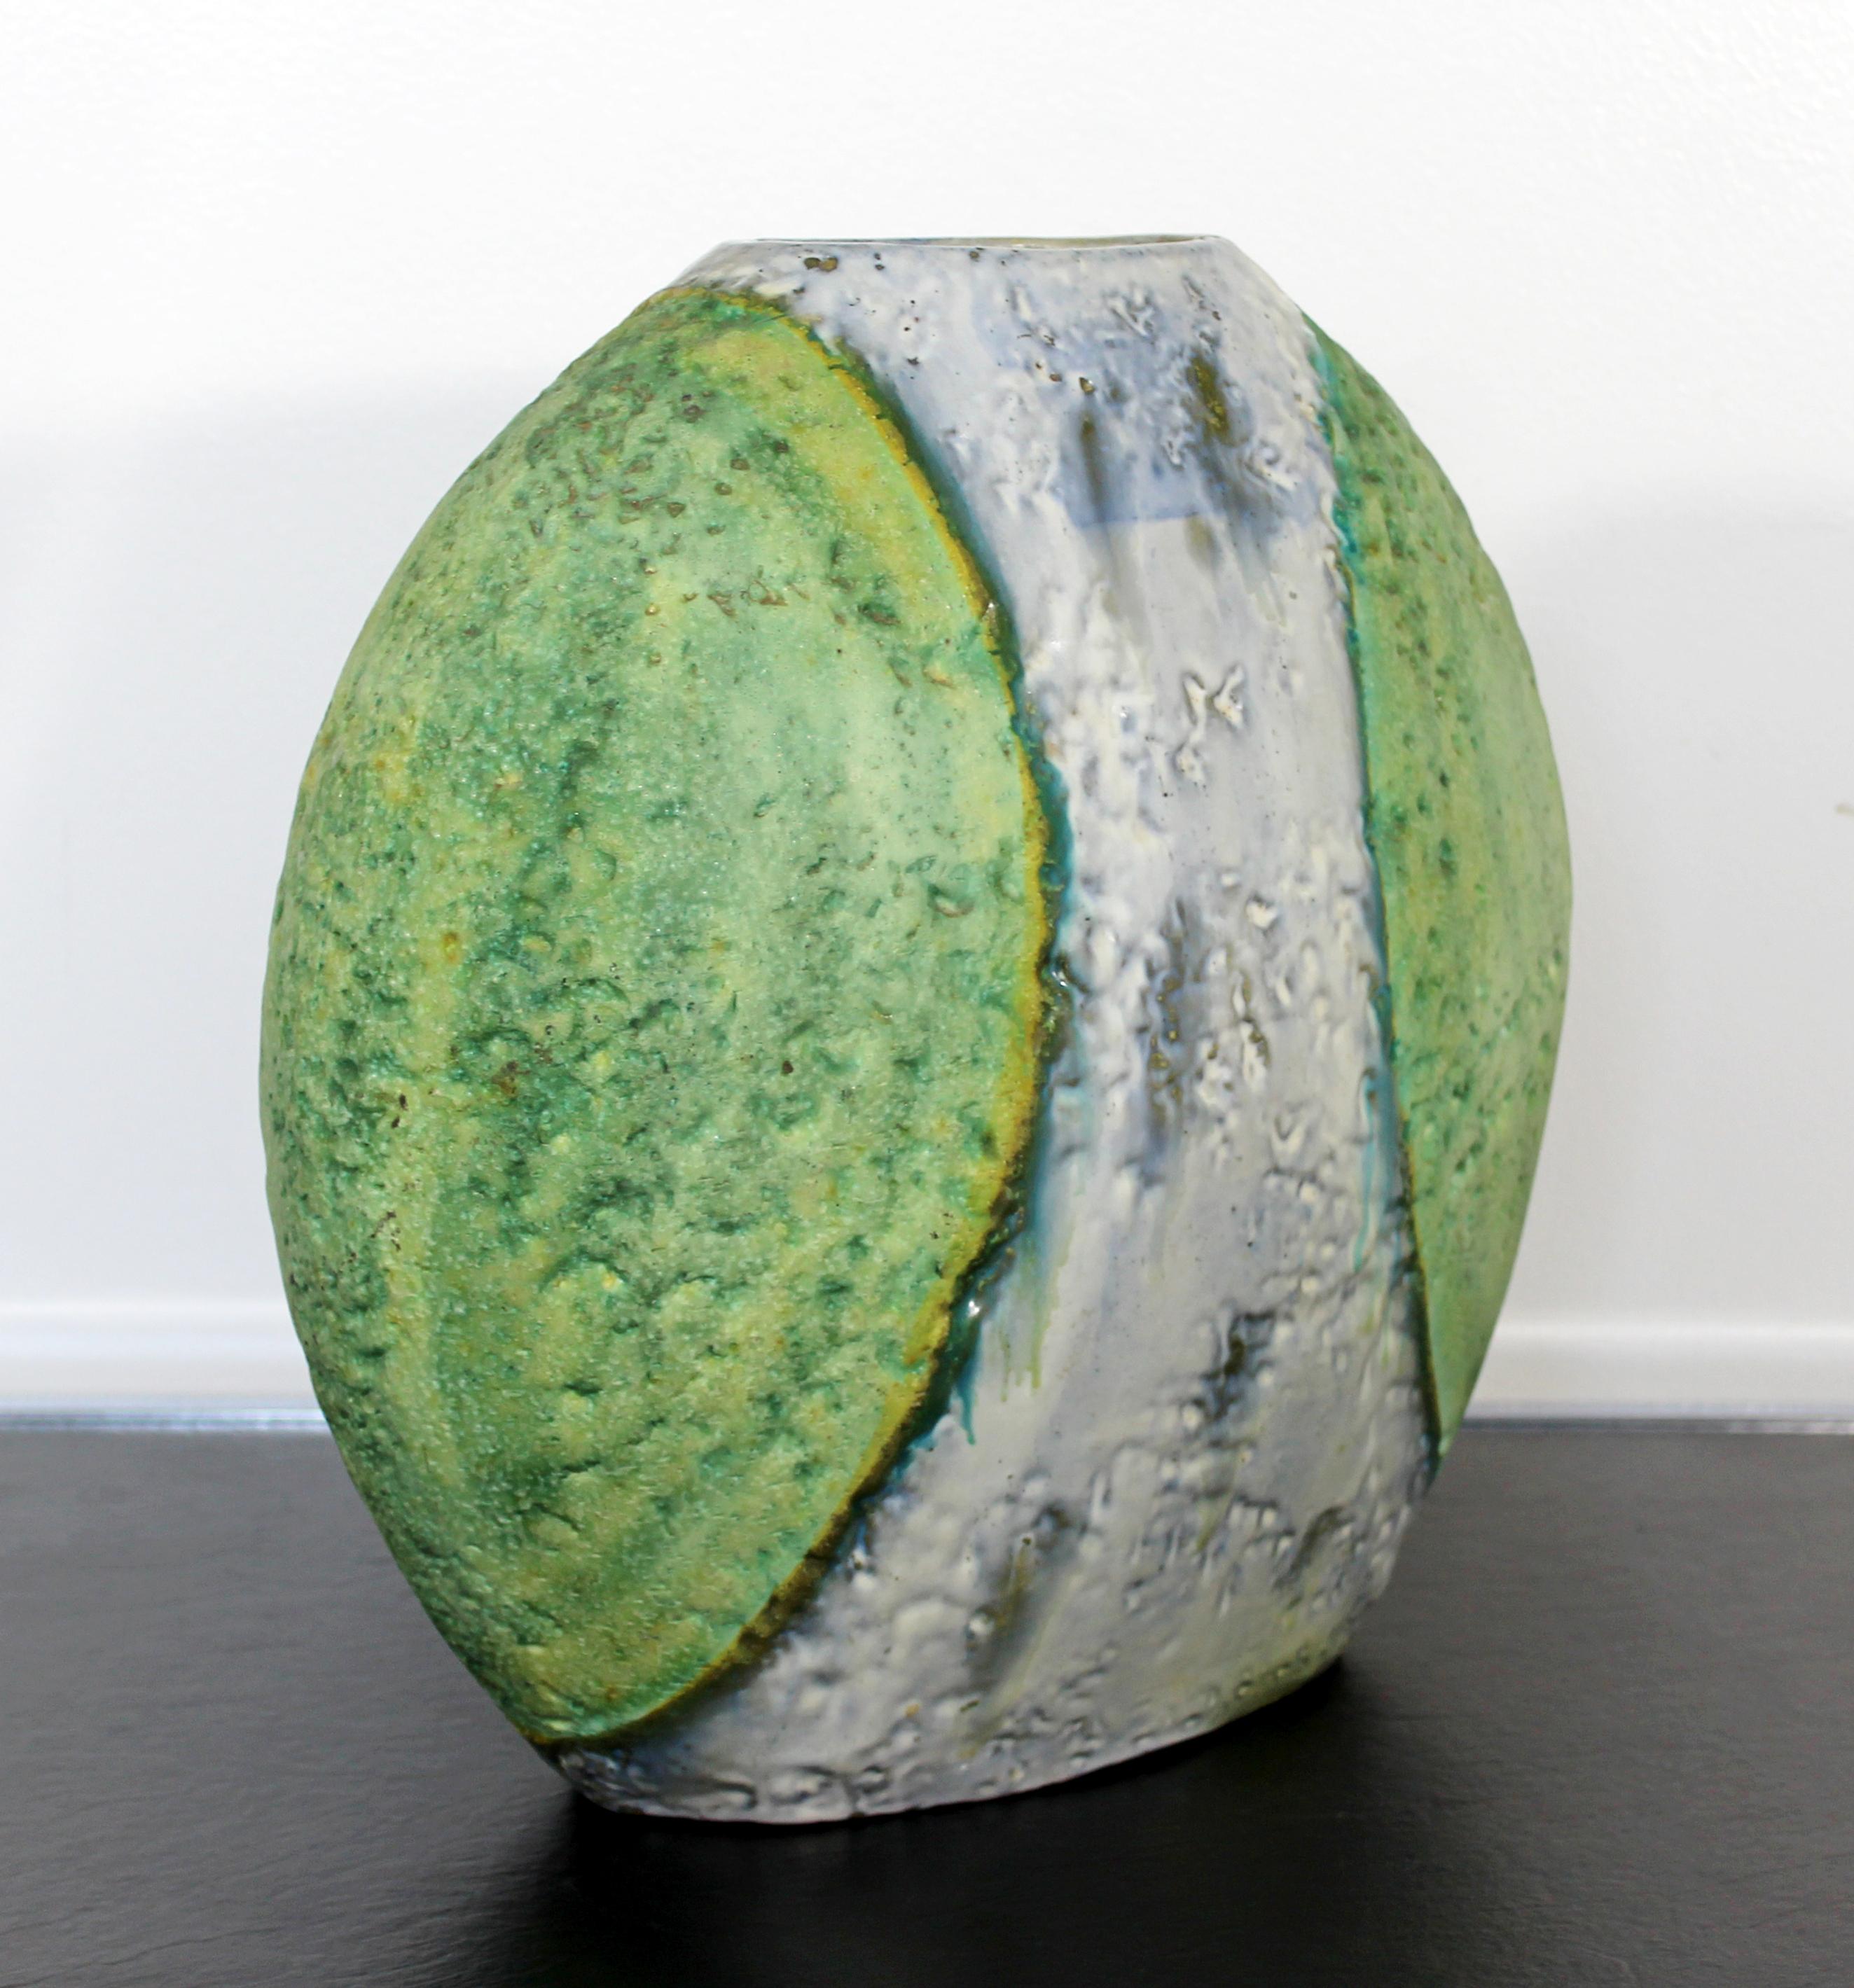 For your consideration is a vibrant, large, green ceramic vessel or vase, signed by Marcello Fantoni for Raymor Italy, circa 1960s. In excellent condition. The dimensions are 13